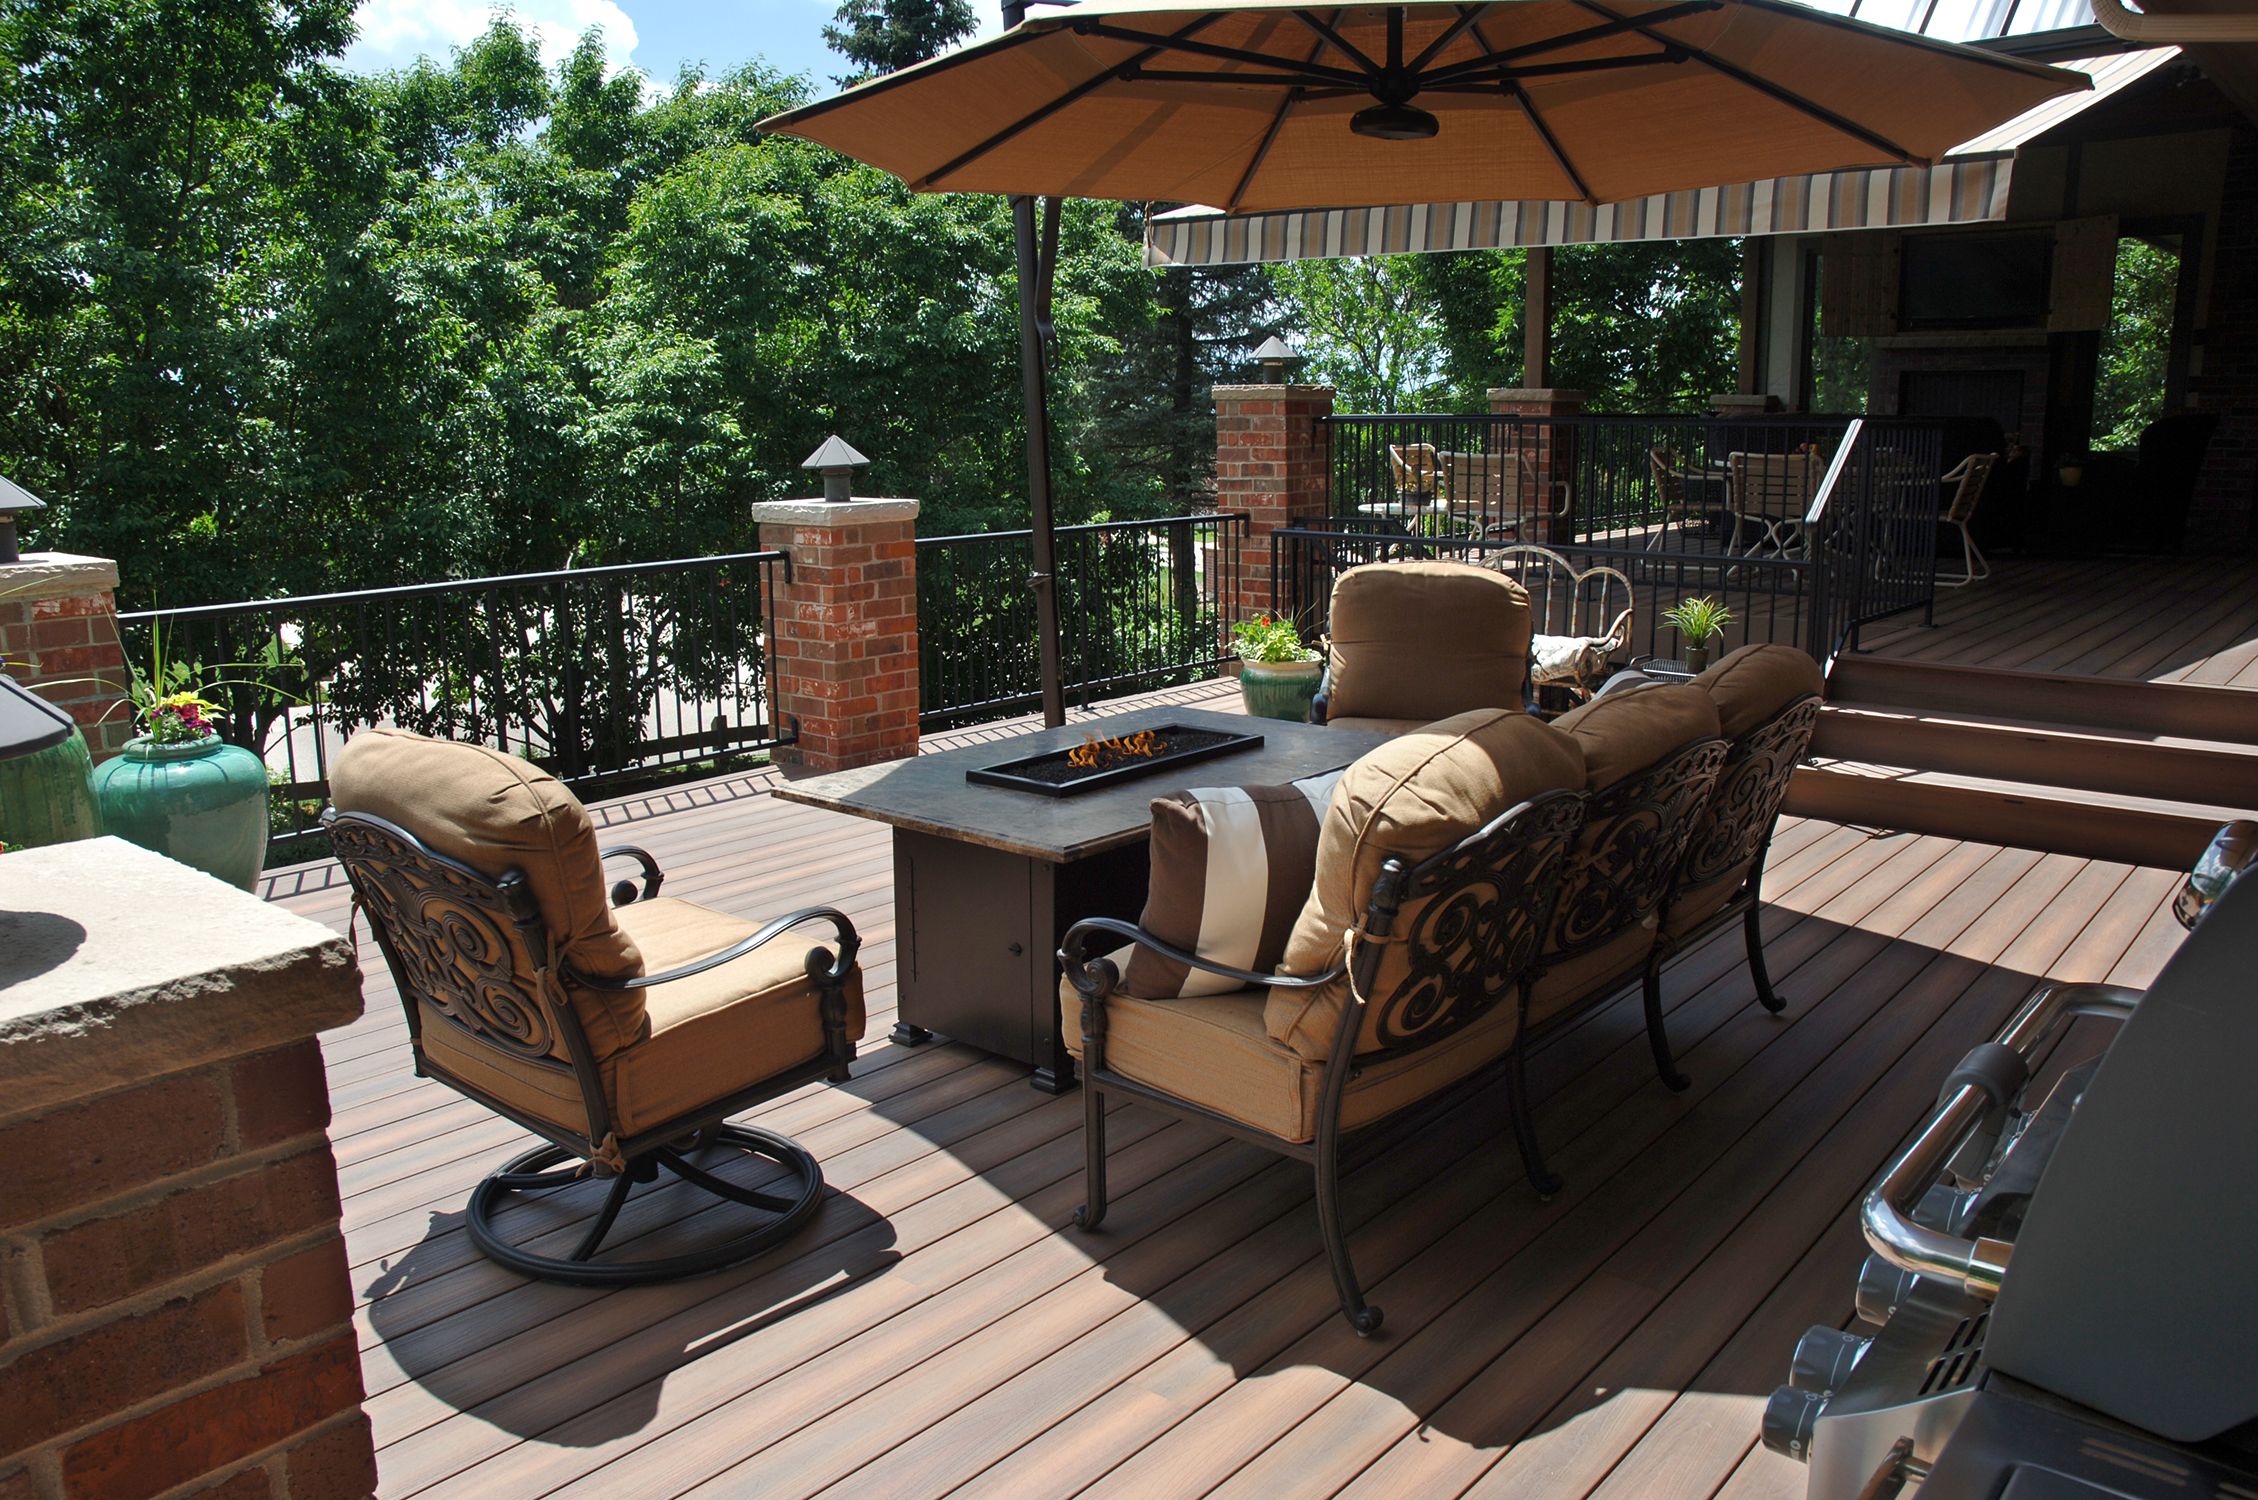 New Deck With Fire Pits/Fire Tables: